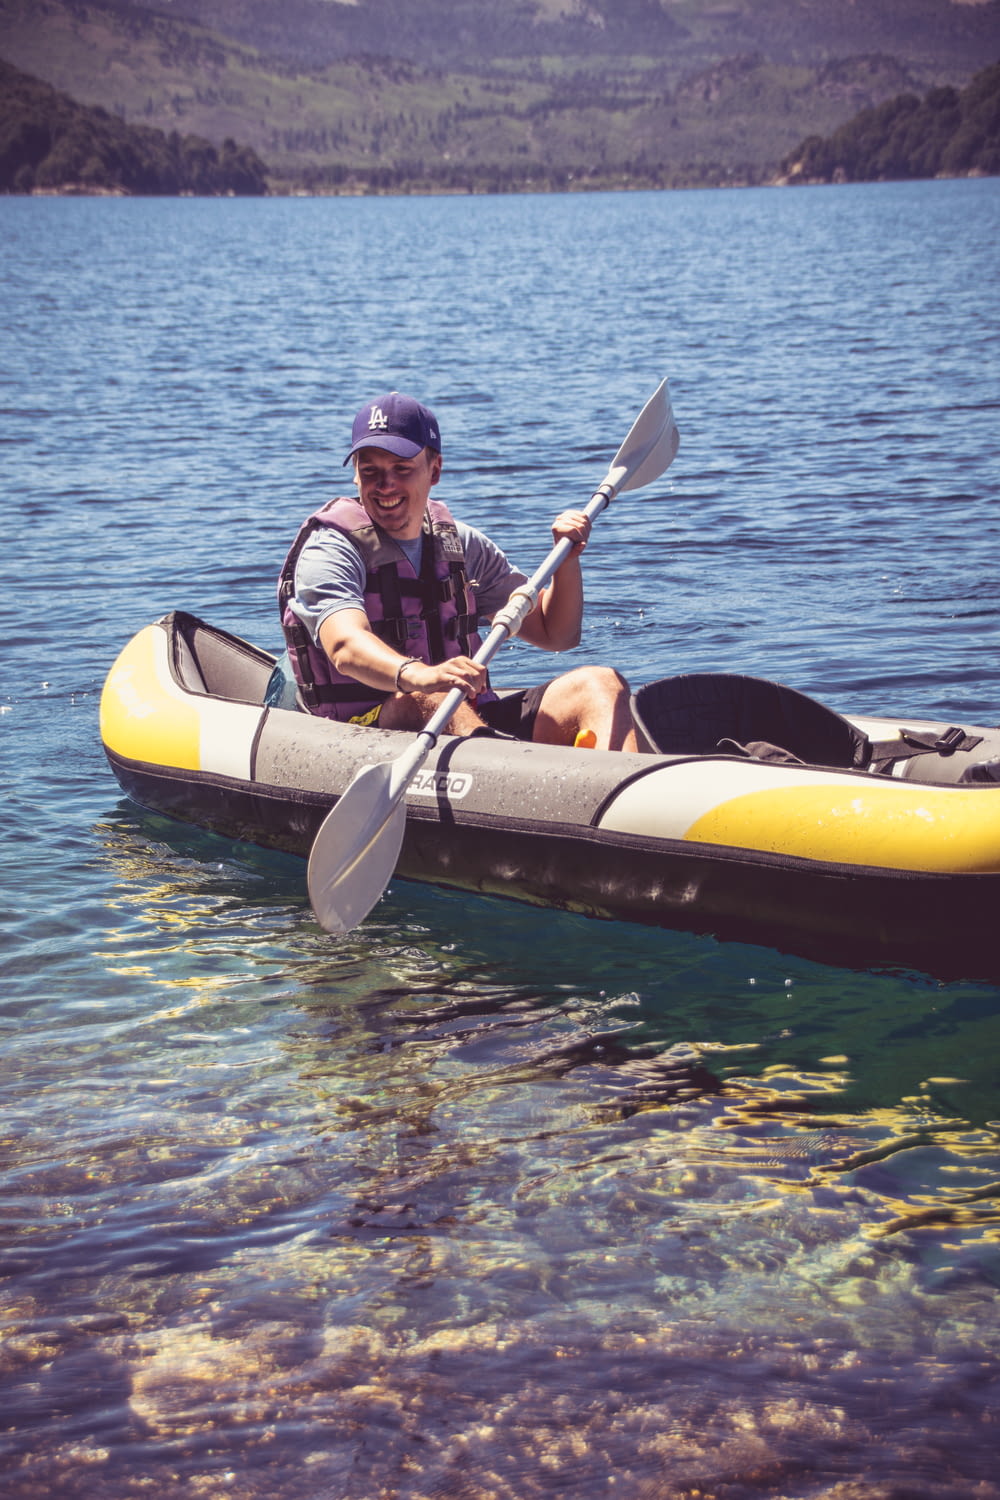 man in black and red jacket riding yellow kayak on blue body of water during daytime